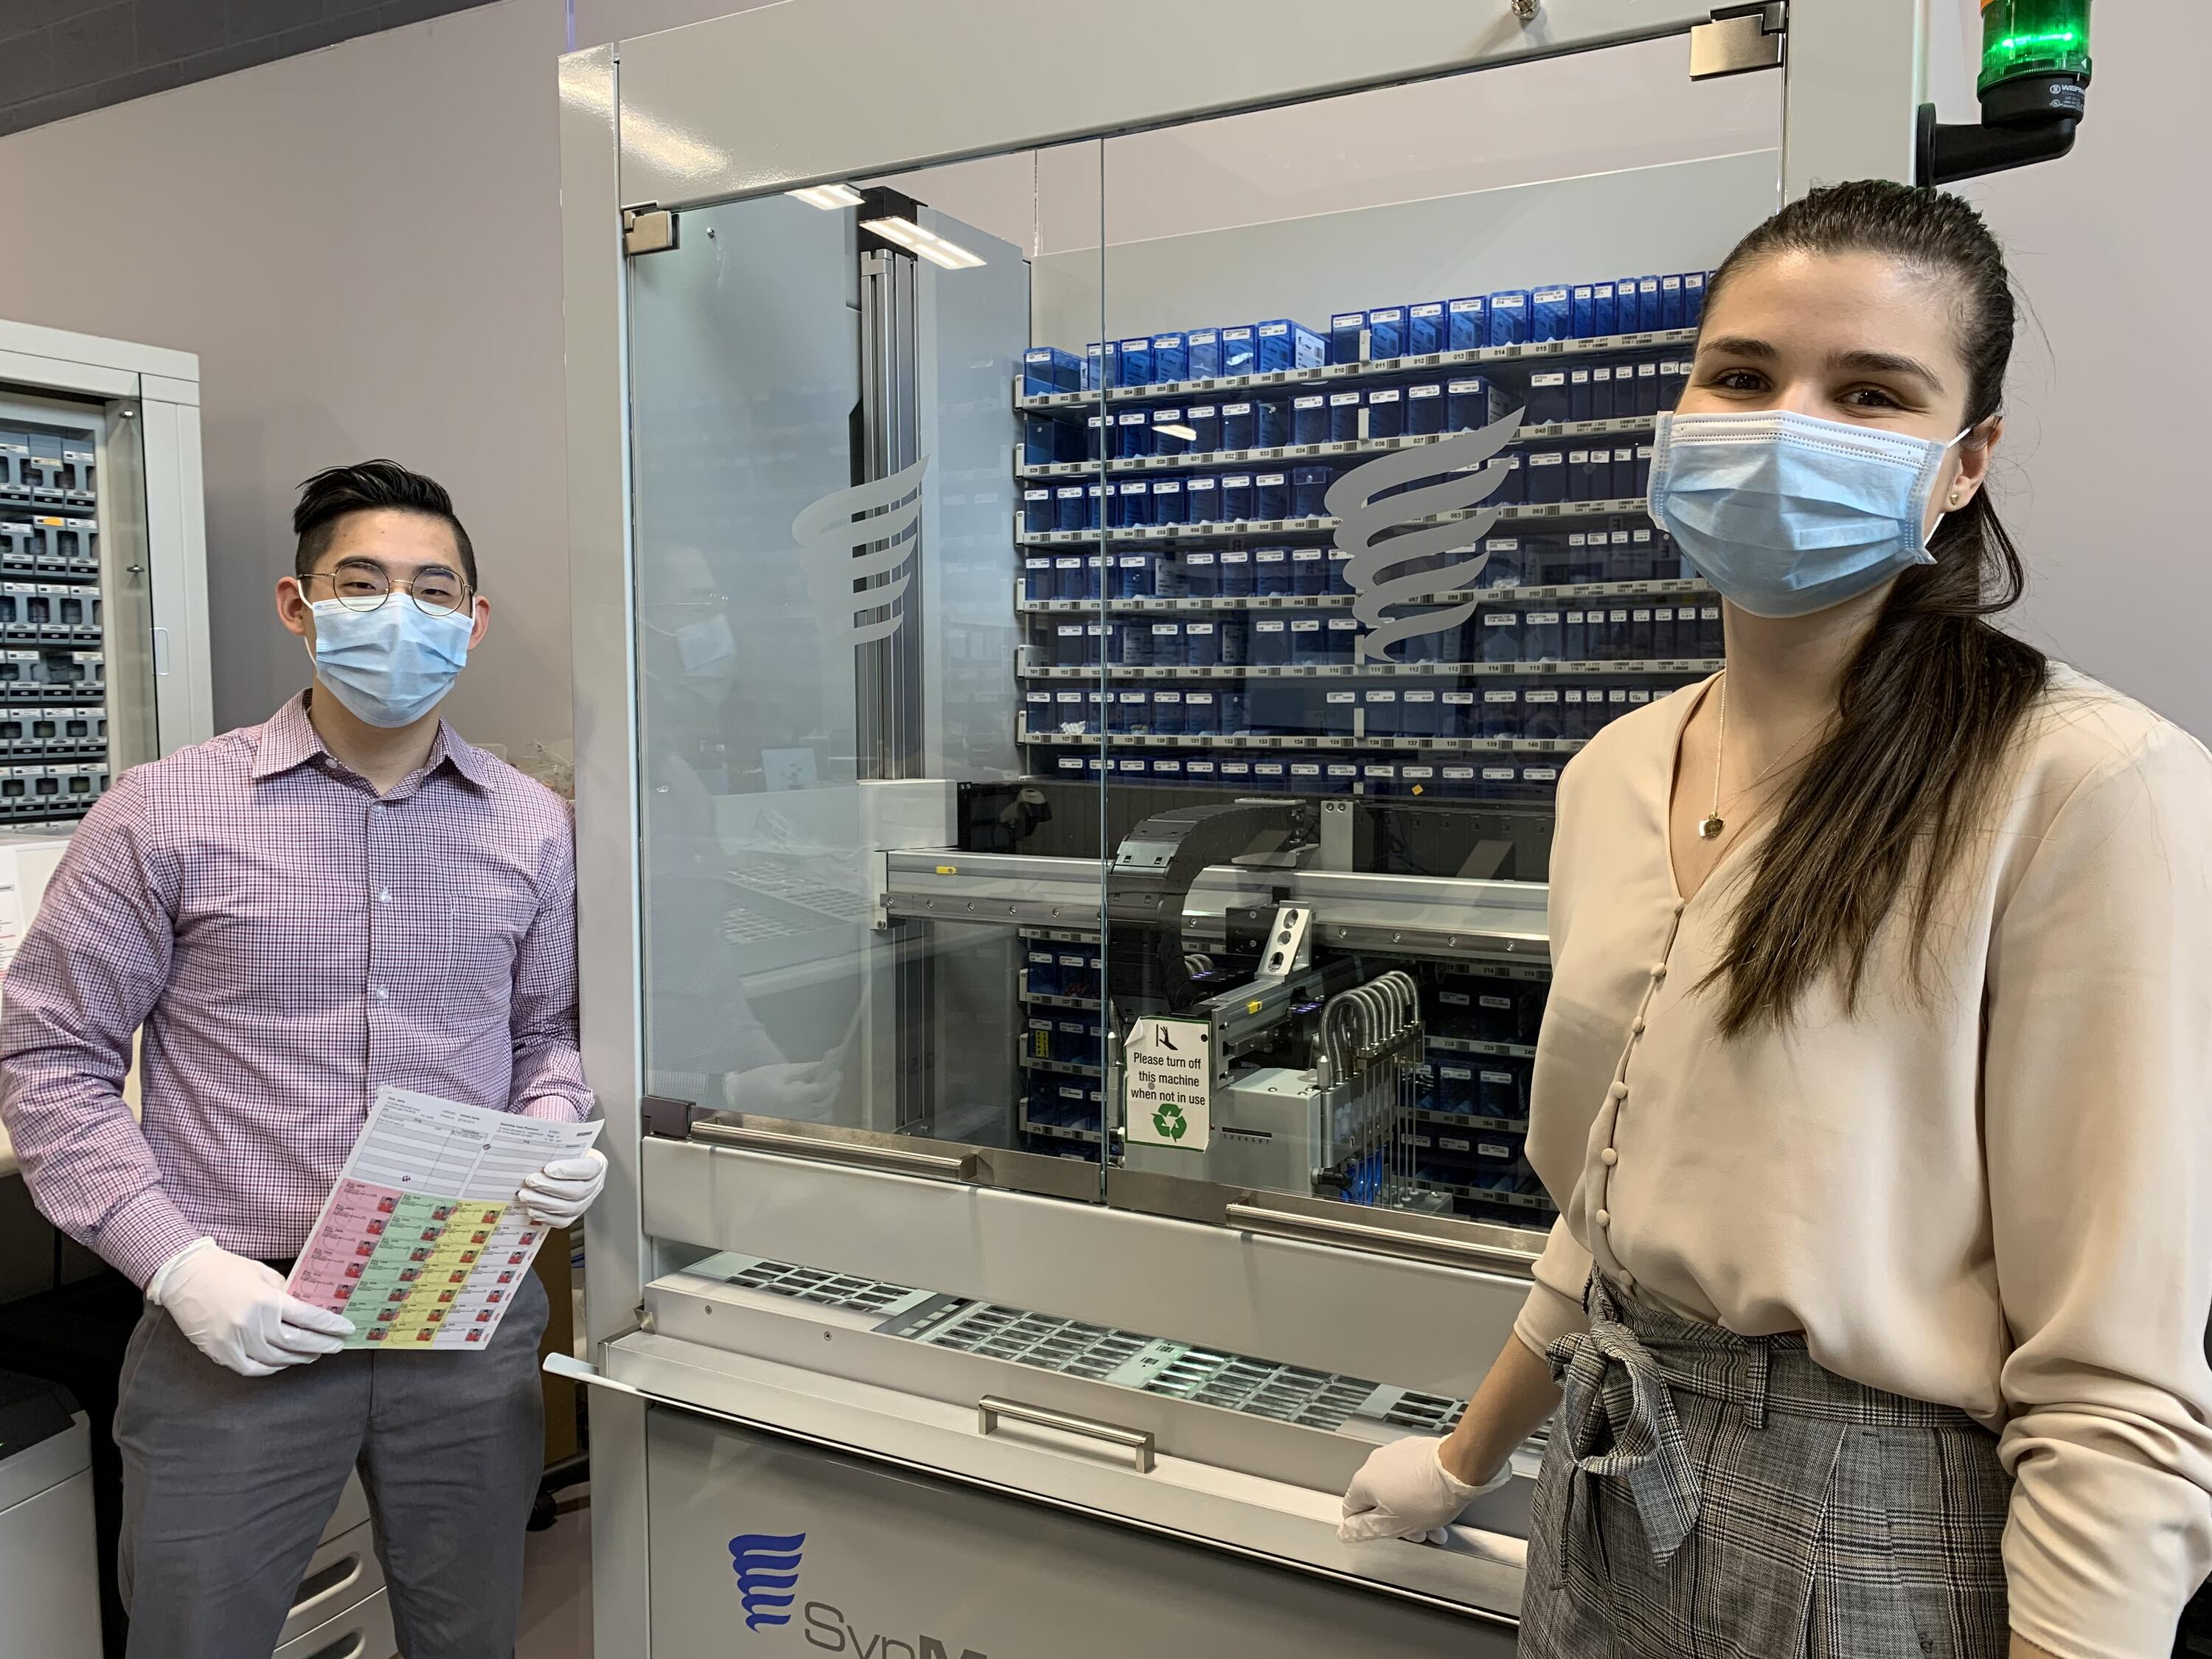 Sean Chih stands with his preceptor Jessica Kozlowski at a medication packaging machine, SynMED, in the Seamless Care Pharmacy.